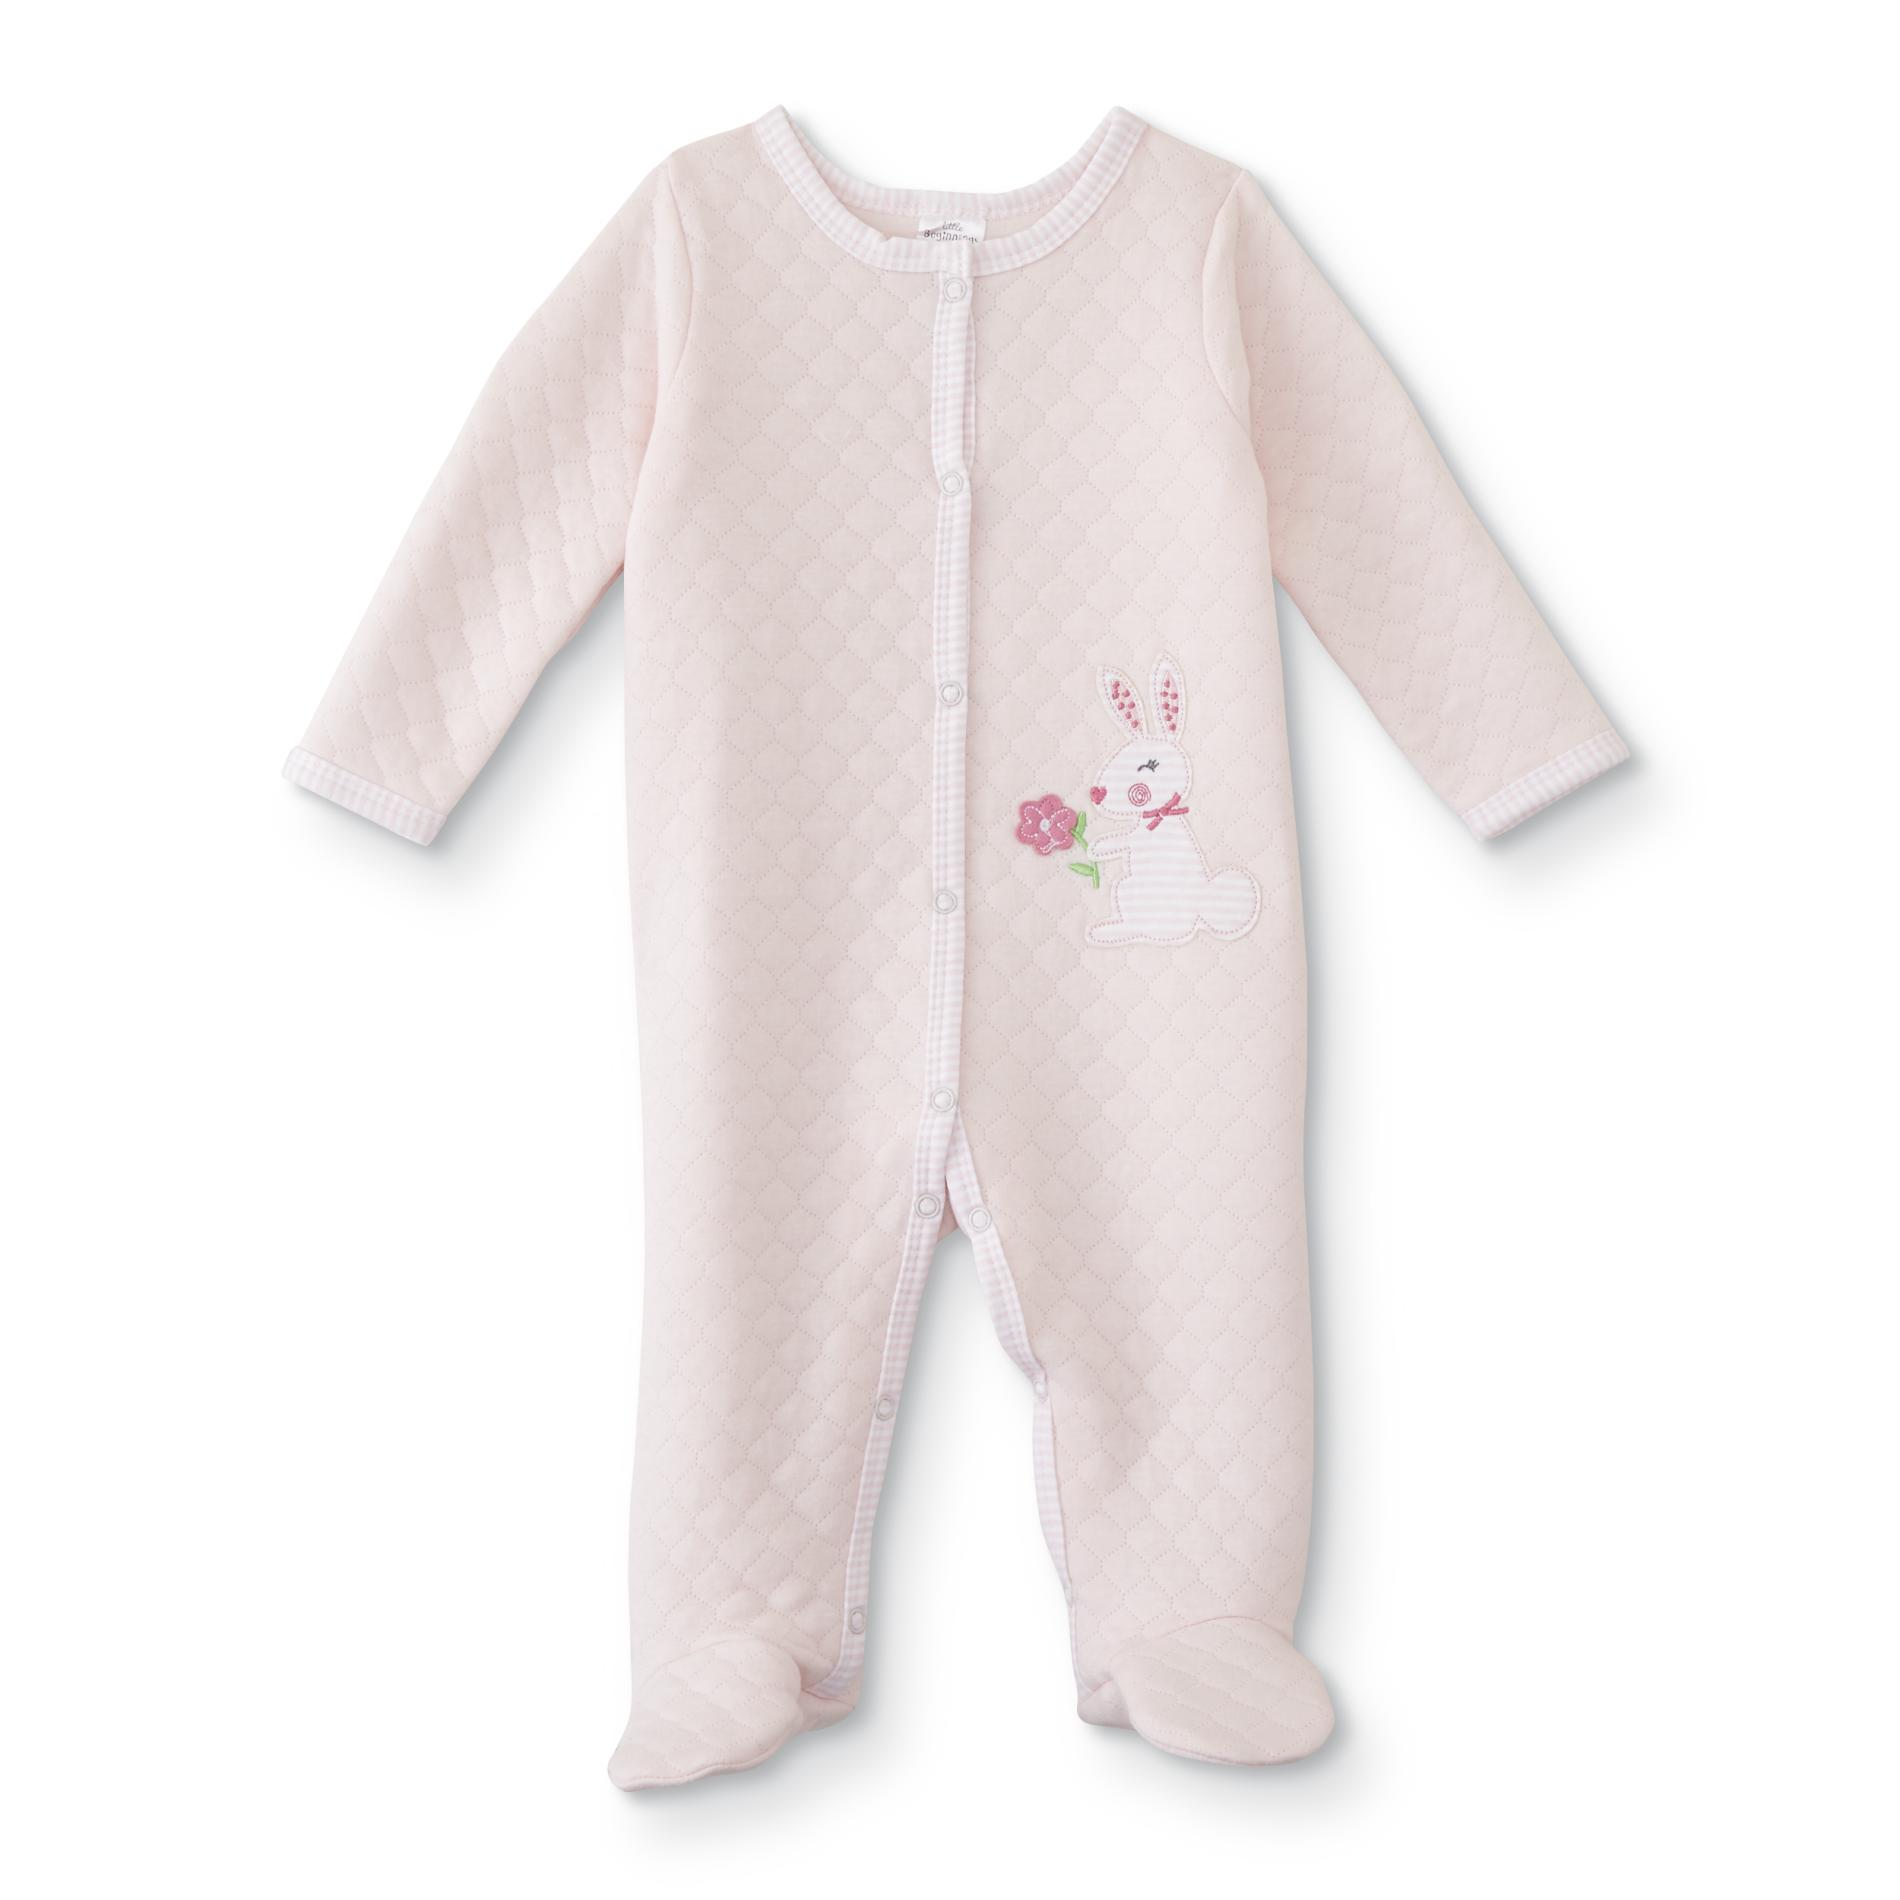 Cudlie Infant Girls' Quilted Sleeper Pajamas - Bunny